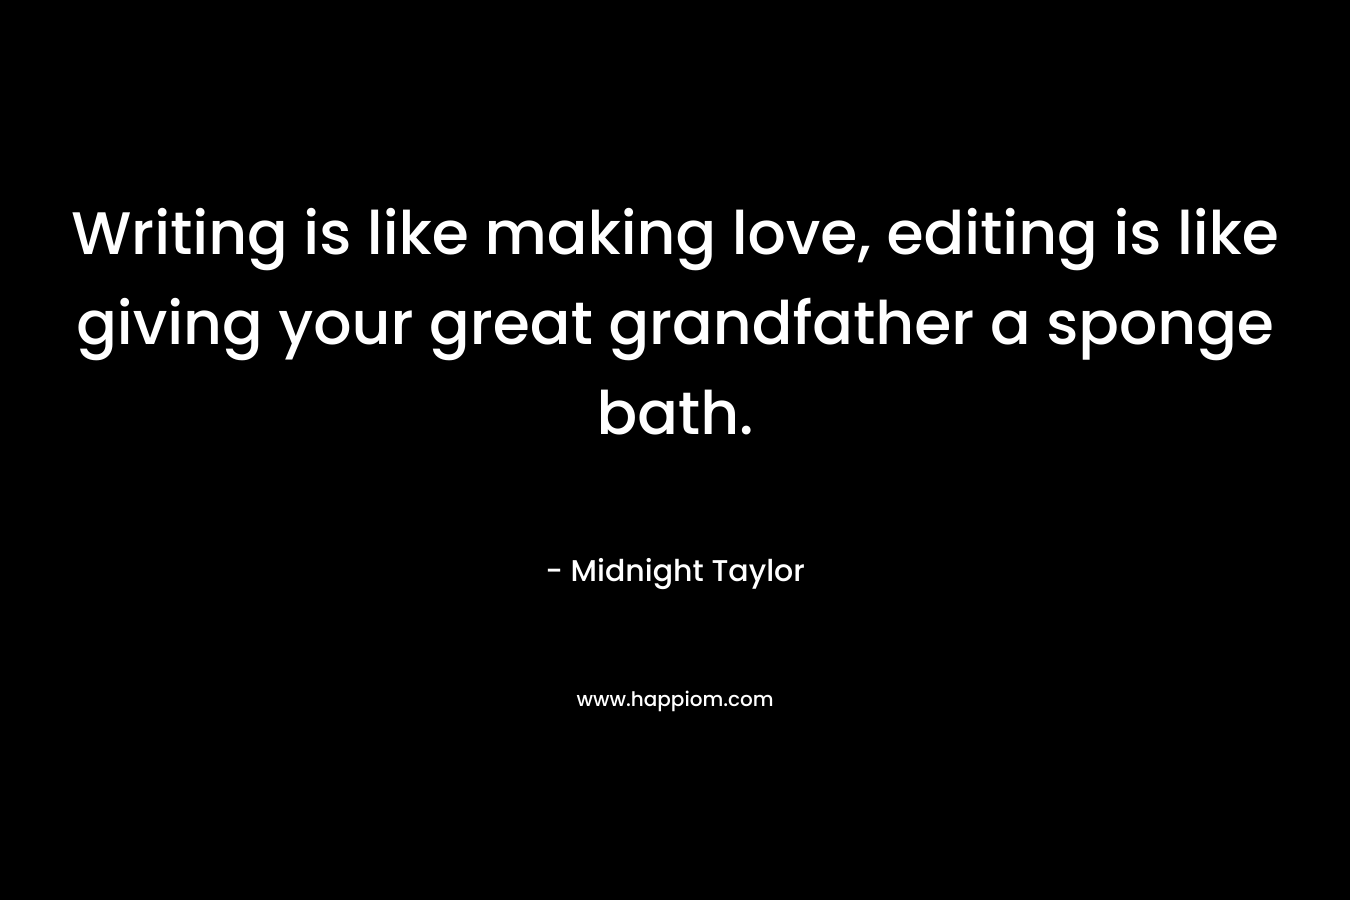 Writing is like making love, editing is like giving your great grandfather a sponge bath. – Midnight Taylor